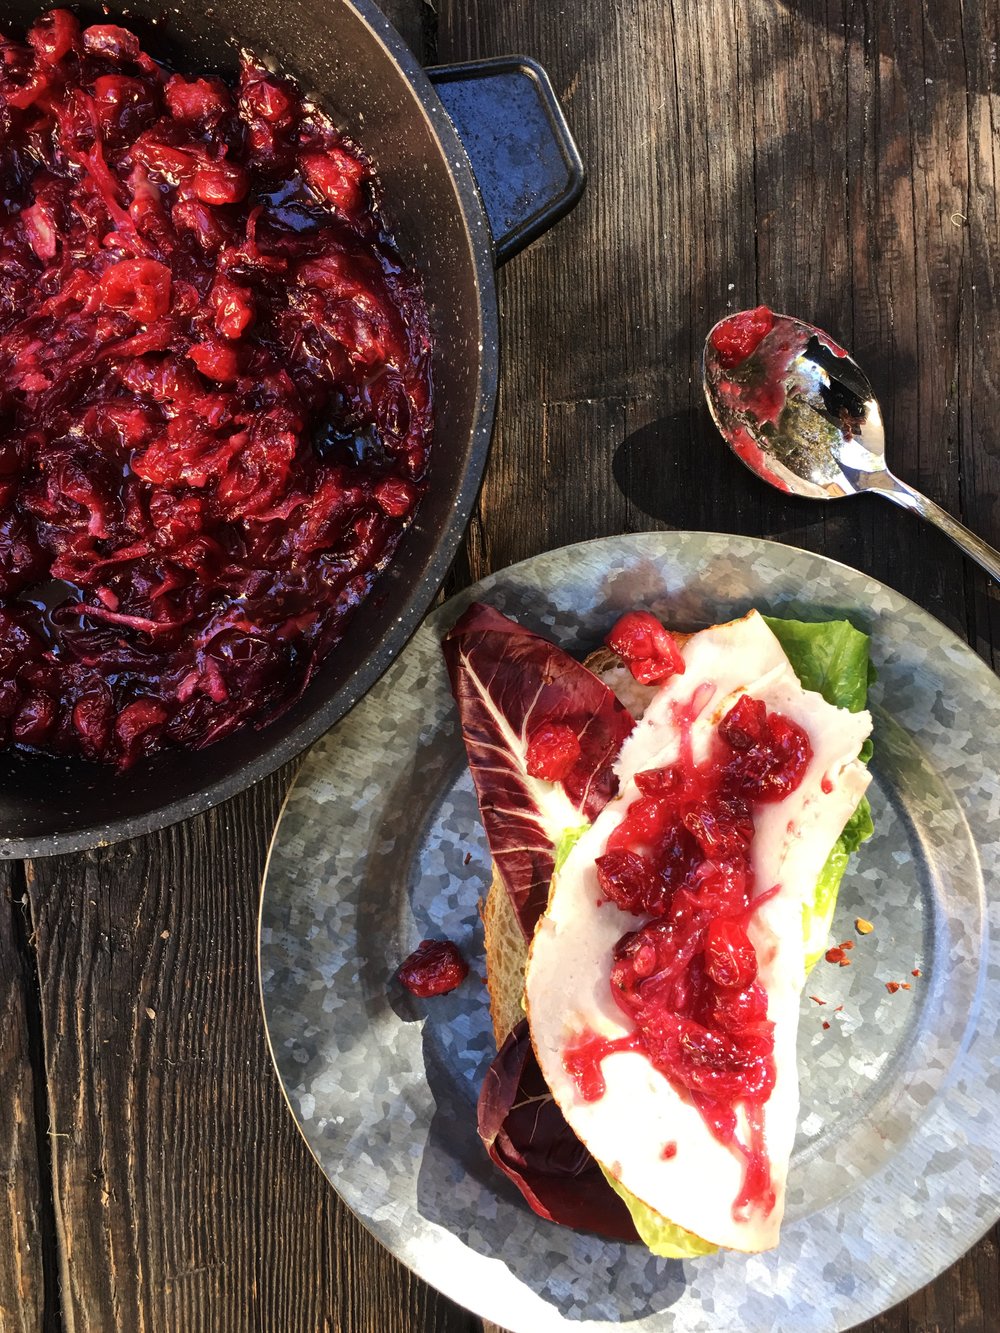 You'll want to plan ahead for left-overs ... buy a lot of cranberries at the store. This savory cranberry on a slice of turkey on lettuce and bread. Cranberry sauce has half the sugar, and incorporates caramelized onion. See our Instagram link here.